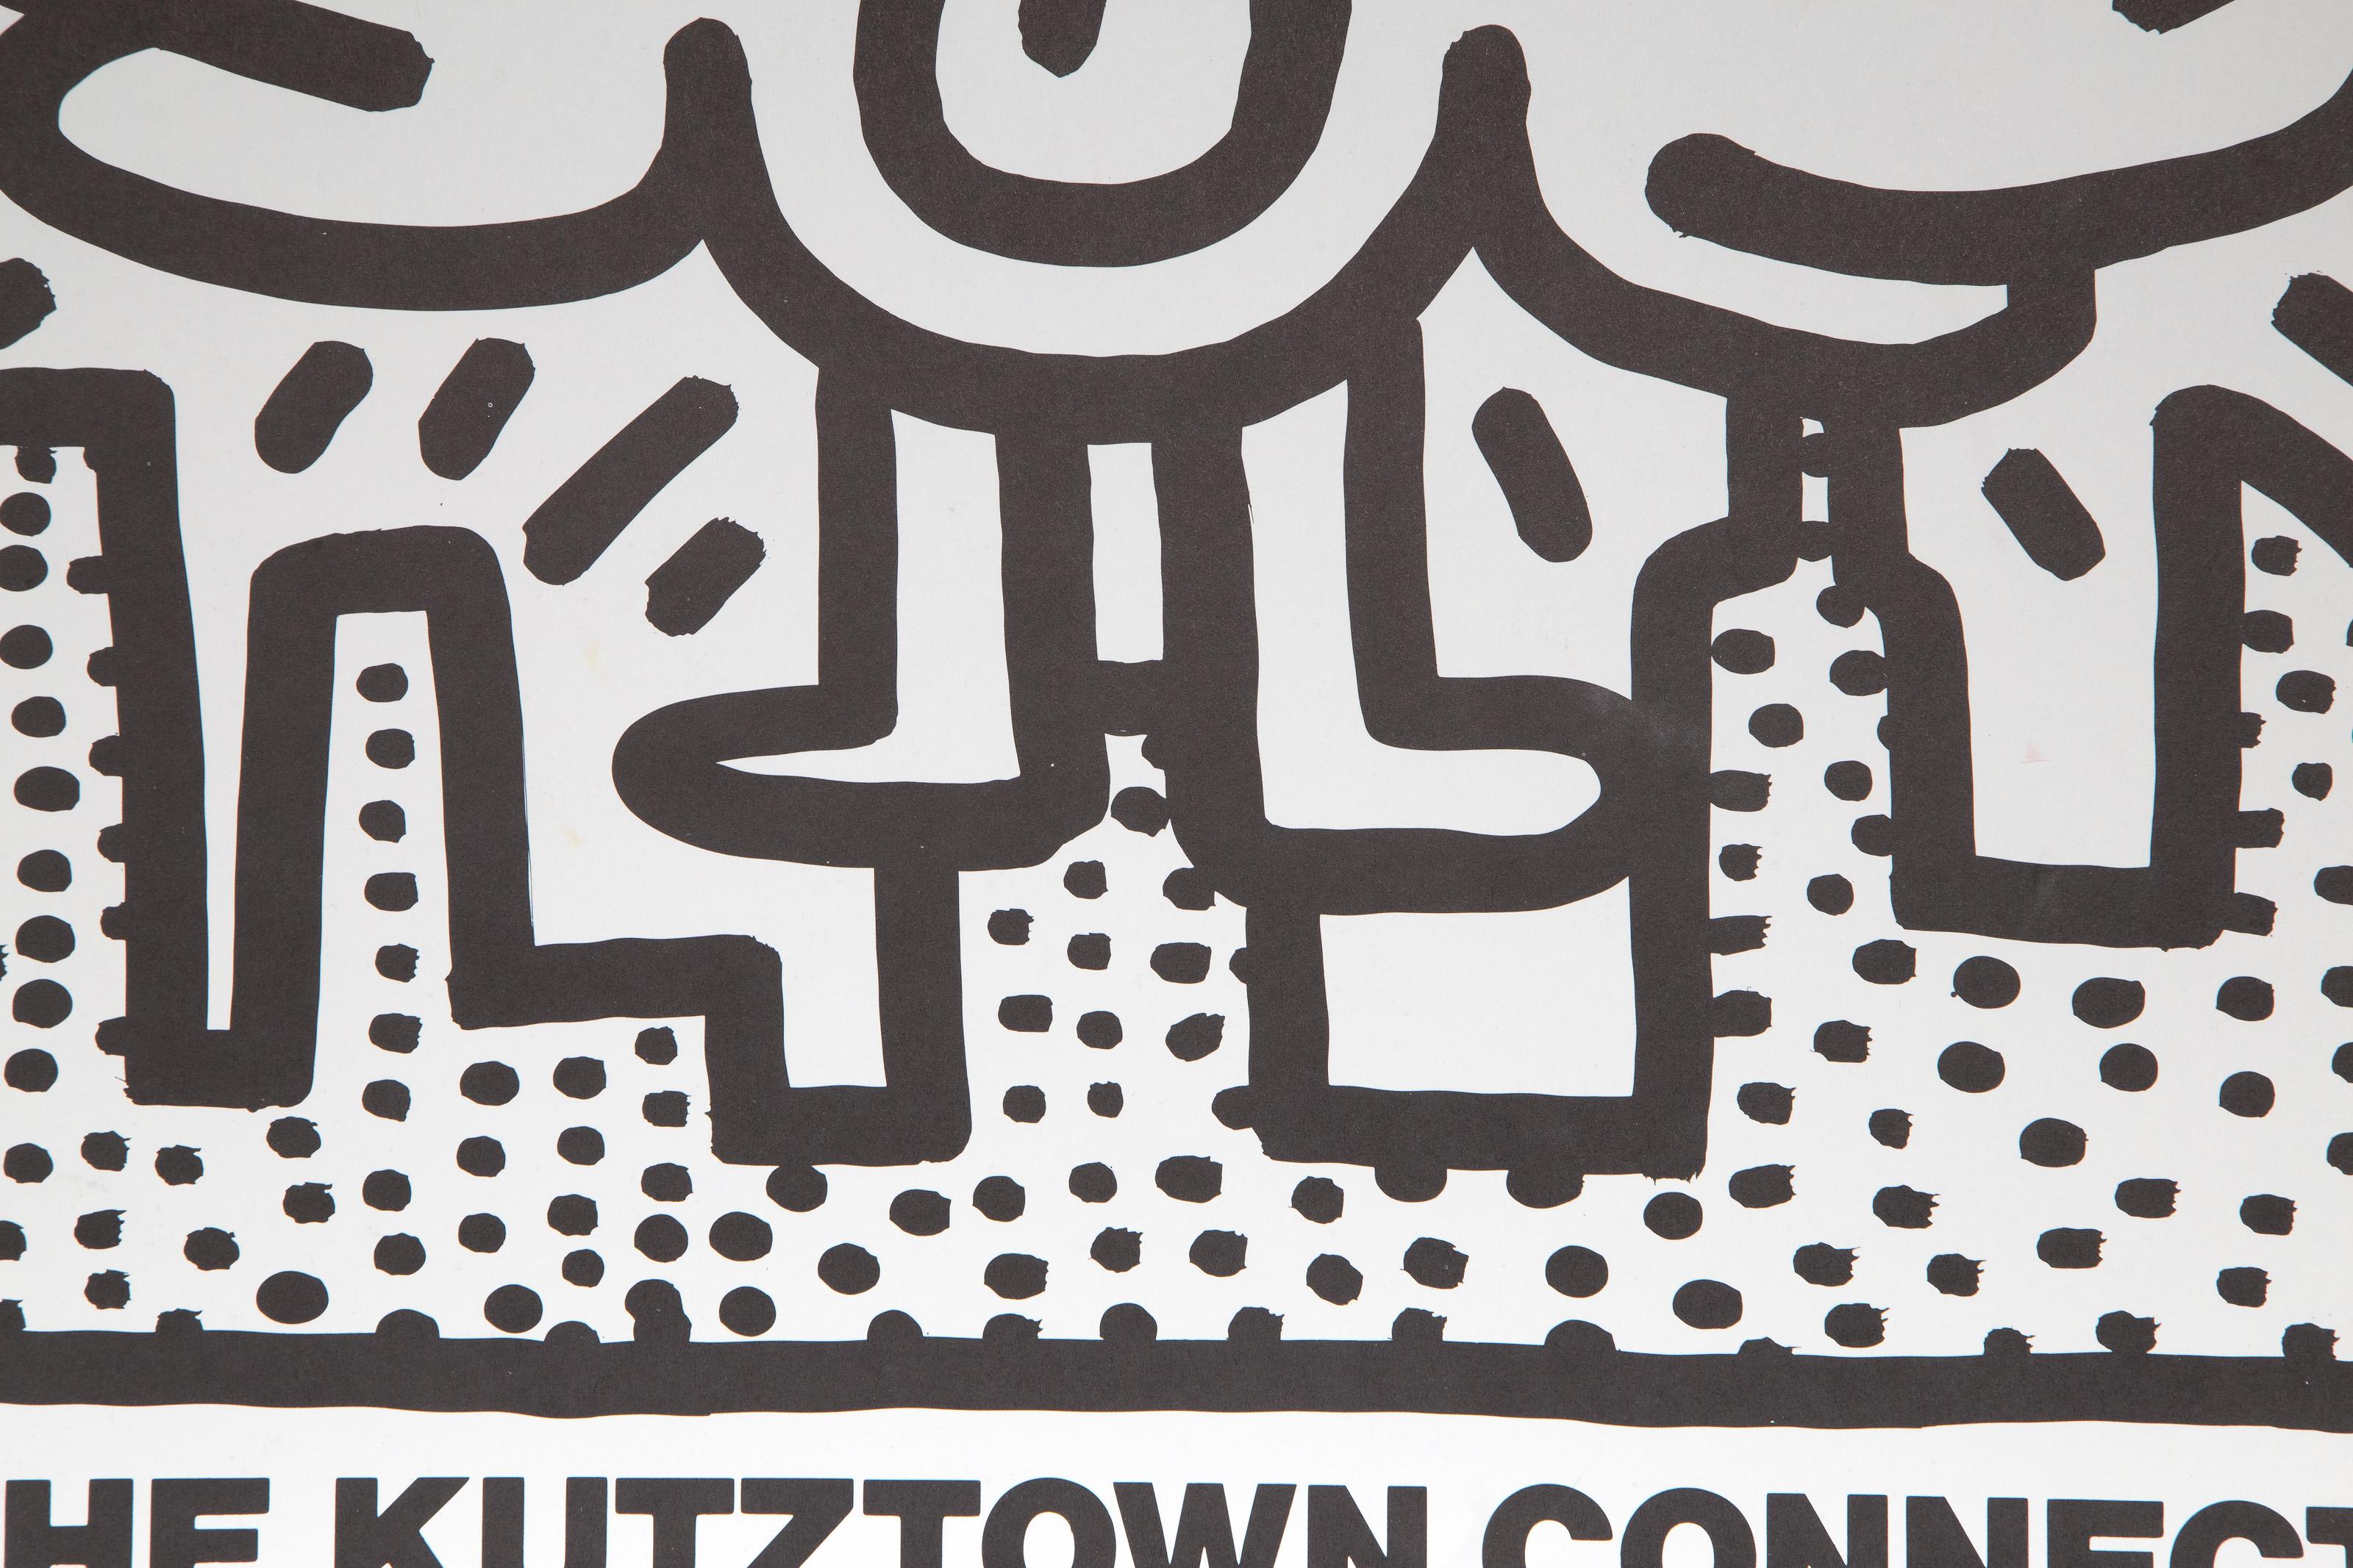 The Kutztown Connection 1984, Exhibition Poster by Keith Haring 1